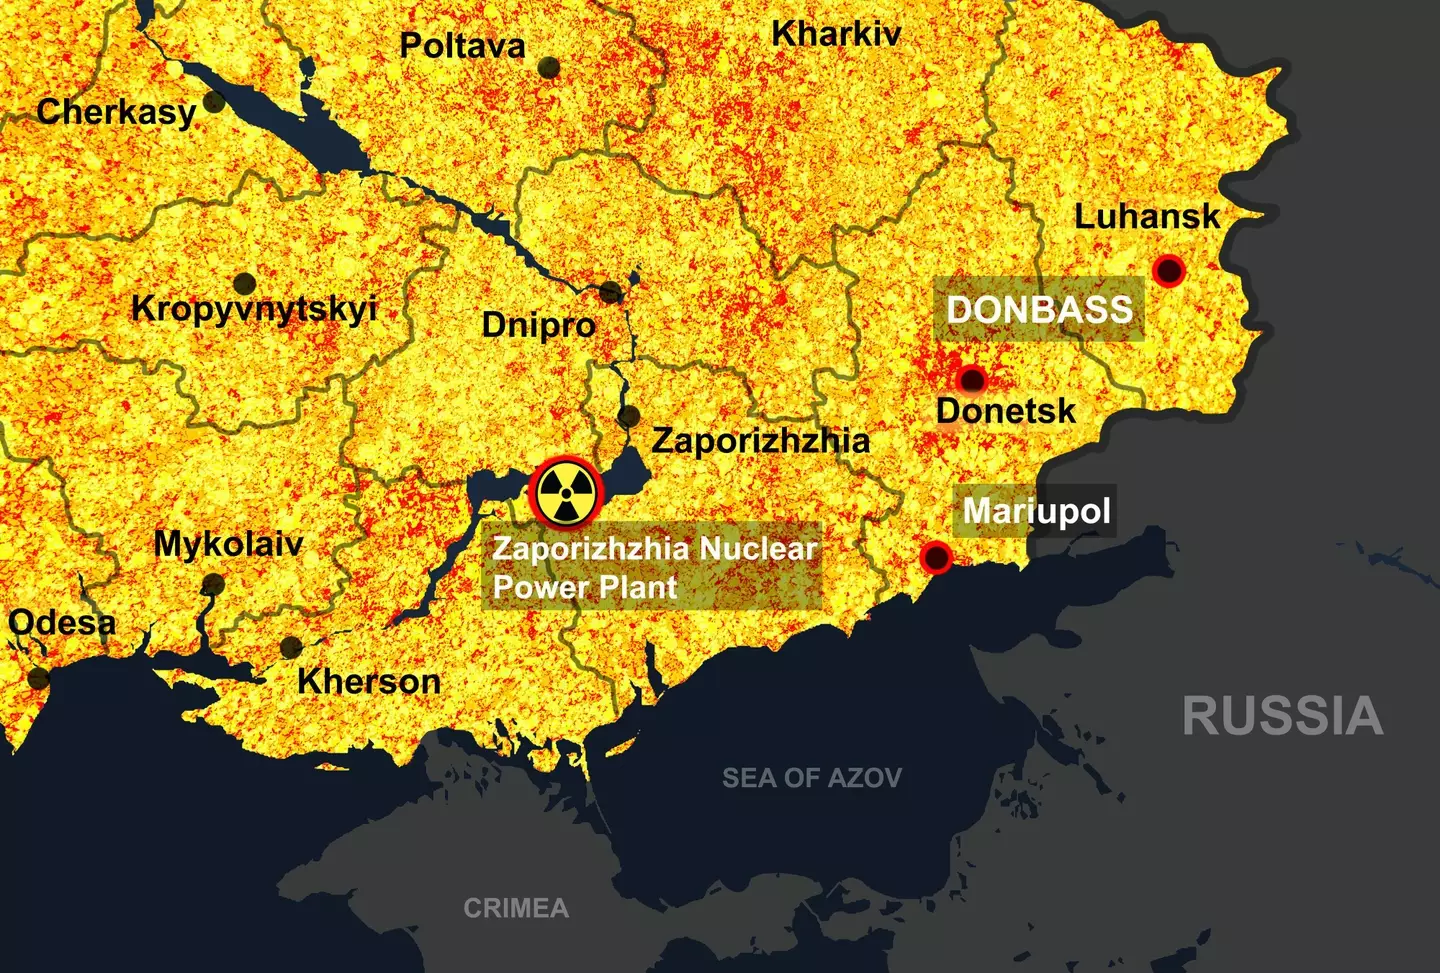 The Zaporizhzhia nuclear power plant could trigger a nuclear disaster if it remains caught in Russia's invasion.